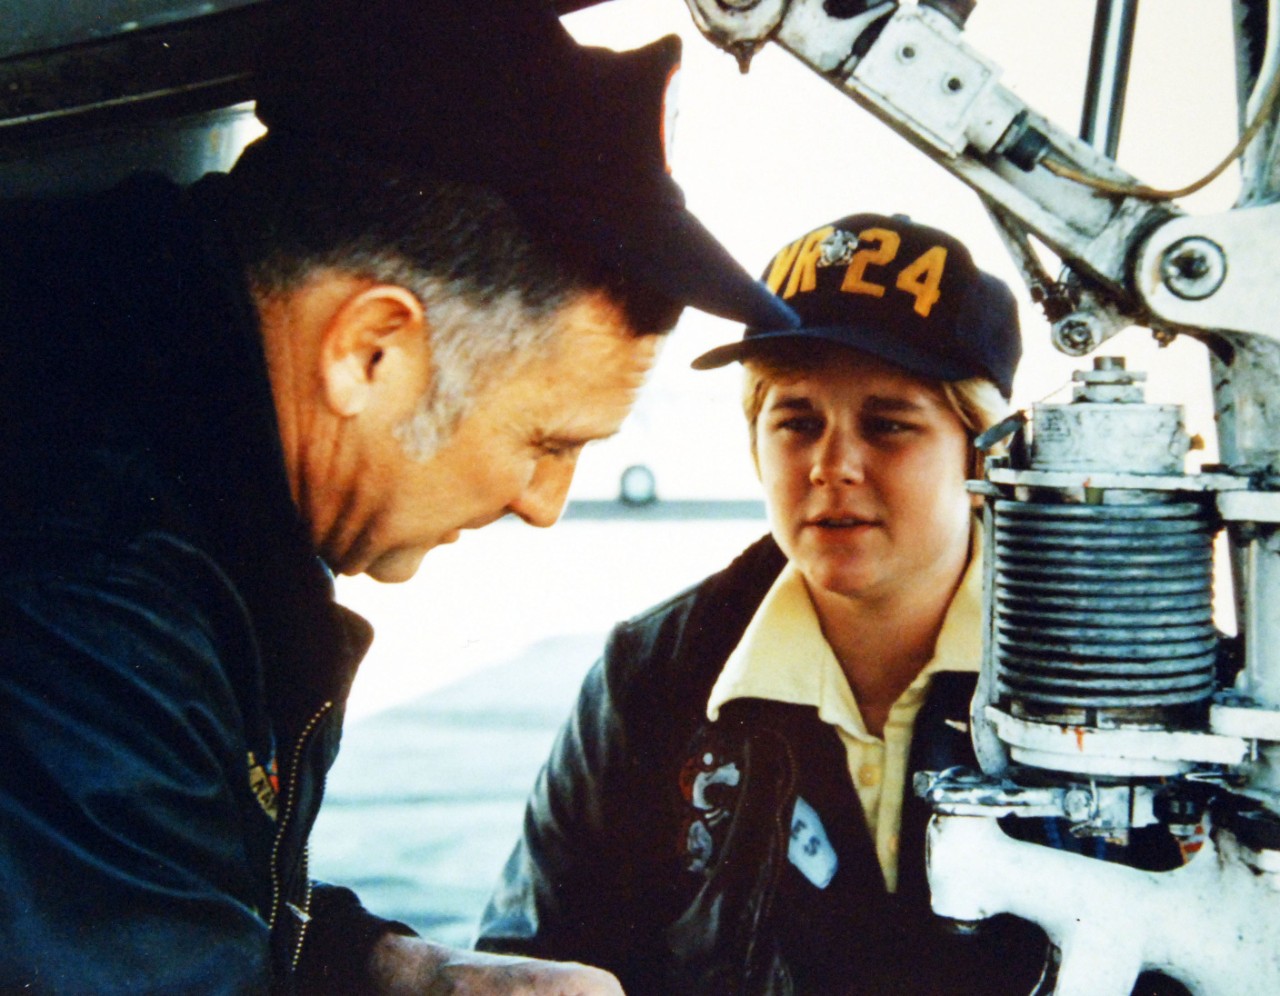 428-GX-K-105739:  Ensign Jane M. Skiles, November 1974.   Rota, Spain.  Master Chief Air Controlman Ron K. Jones, (left), last enlisted pilot in the Navy and Ensign Jane M. Skiles, woman pilot assigned to Fleet Tactical Support Squadron 24, (VR-24), make pre-flight checks of the nose landing gear of a US-2B Tracker antisubmarine aircraft at U.S. Naval Station, Rota, Spain   Photographed by PHAN F.D. Adams, November 1974.   Official U.S. Navy Photograph, now in the collections of the National Archives.  